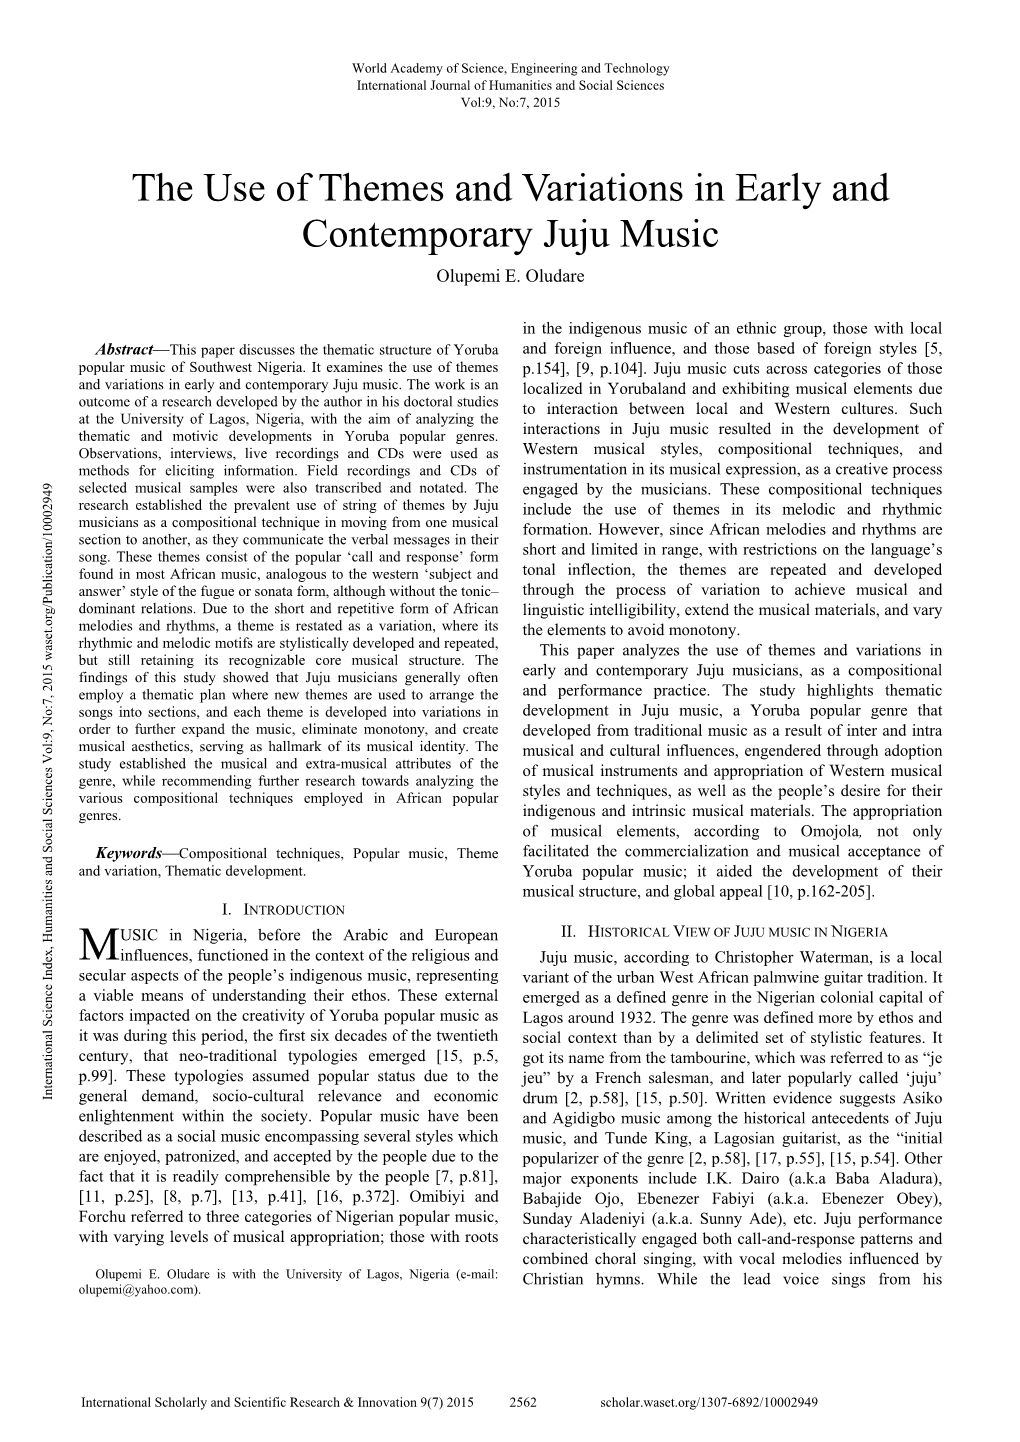 The Use of Themes and Variations in Early and Contemporary Juju Music Olupemi E